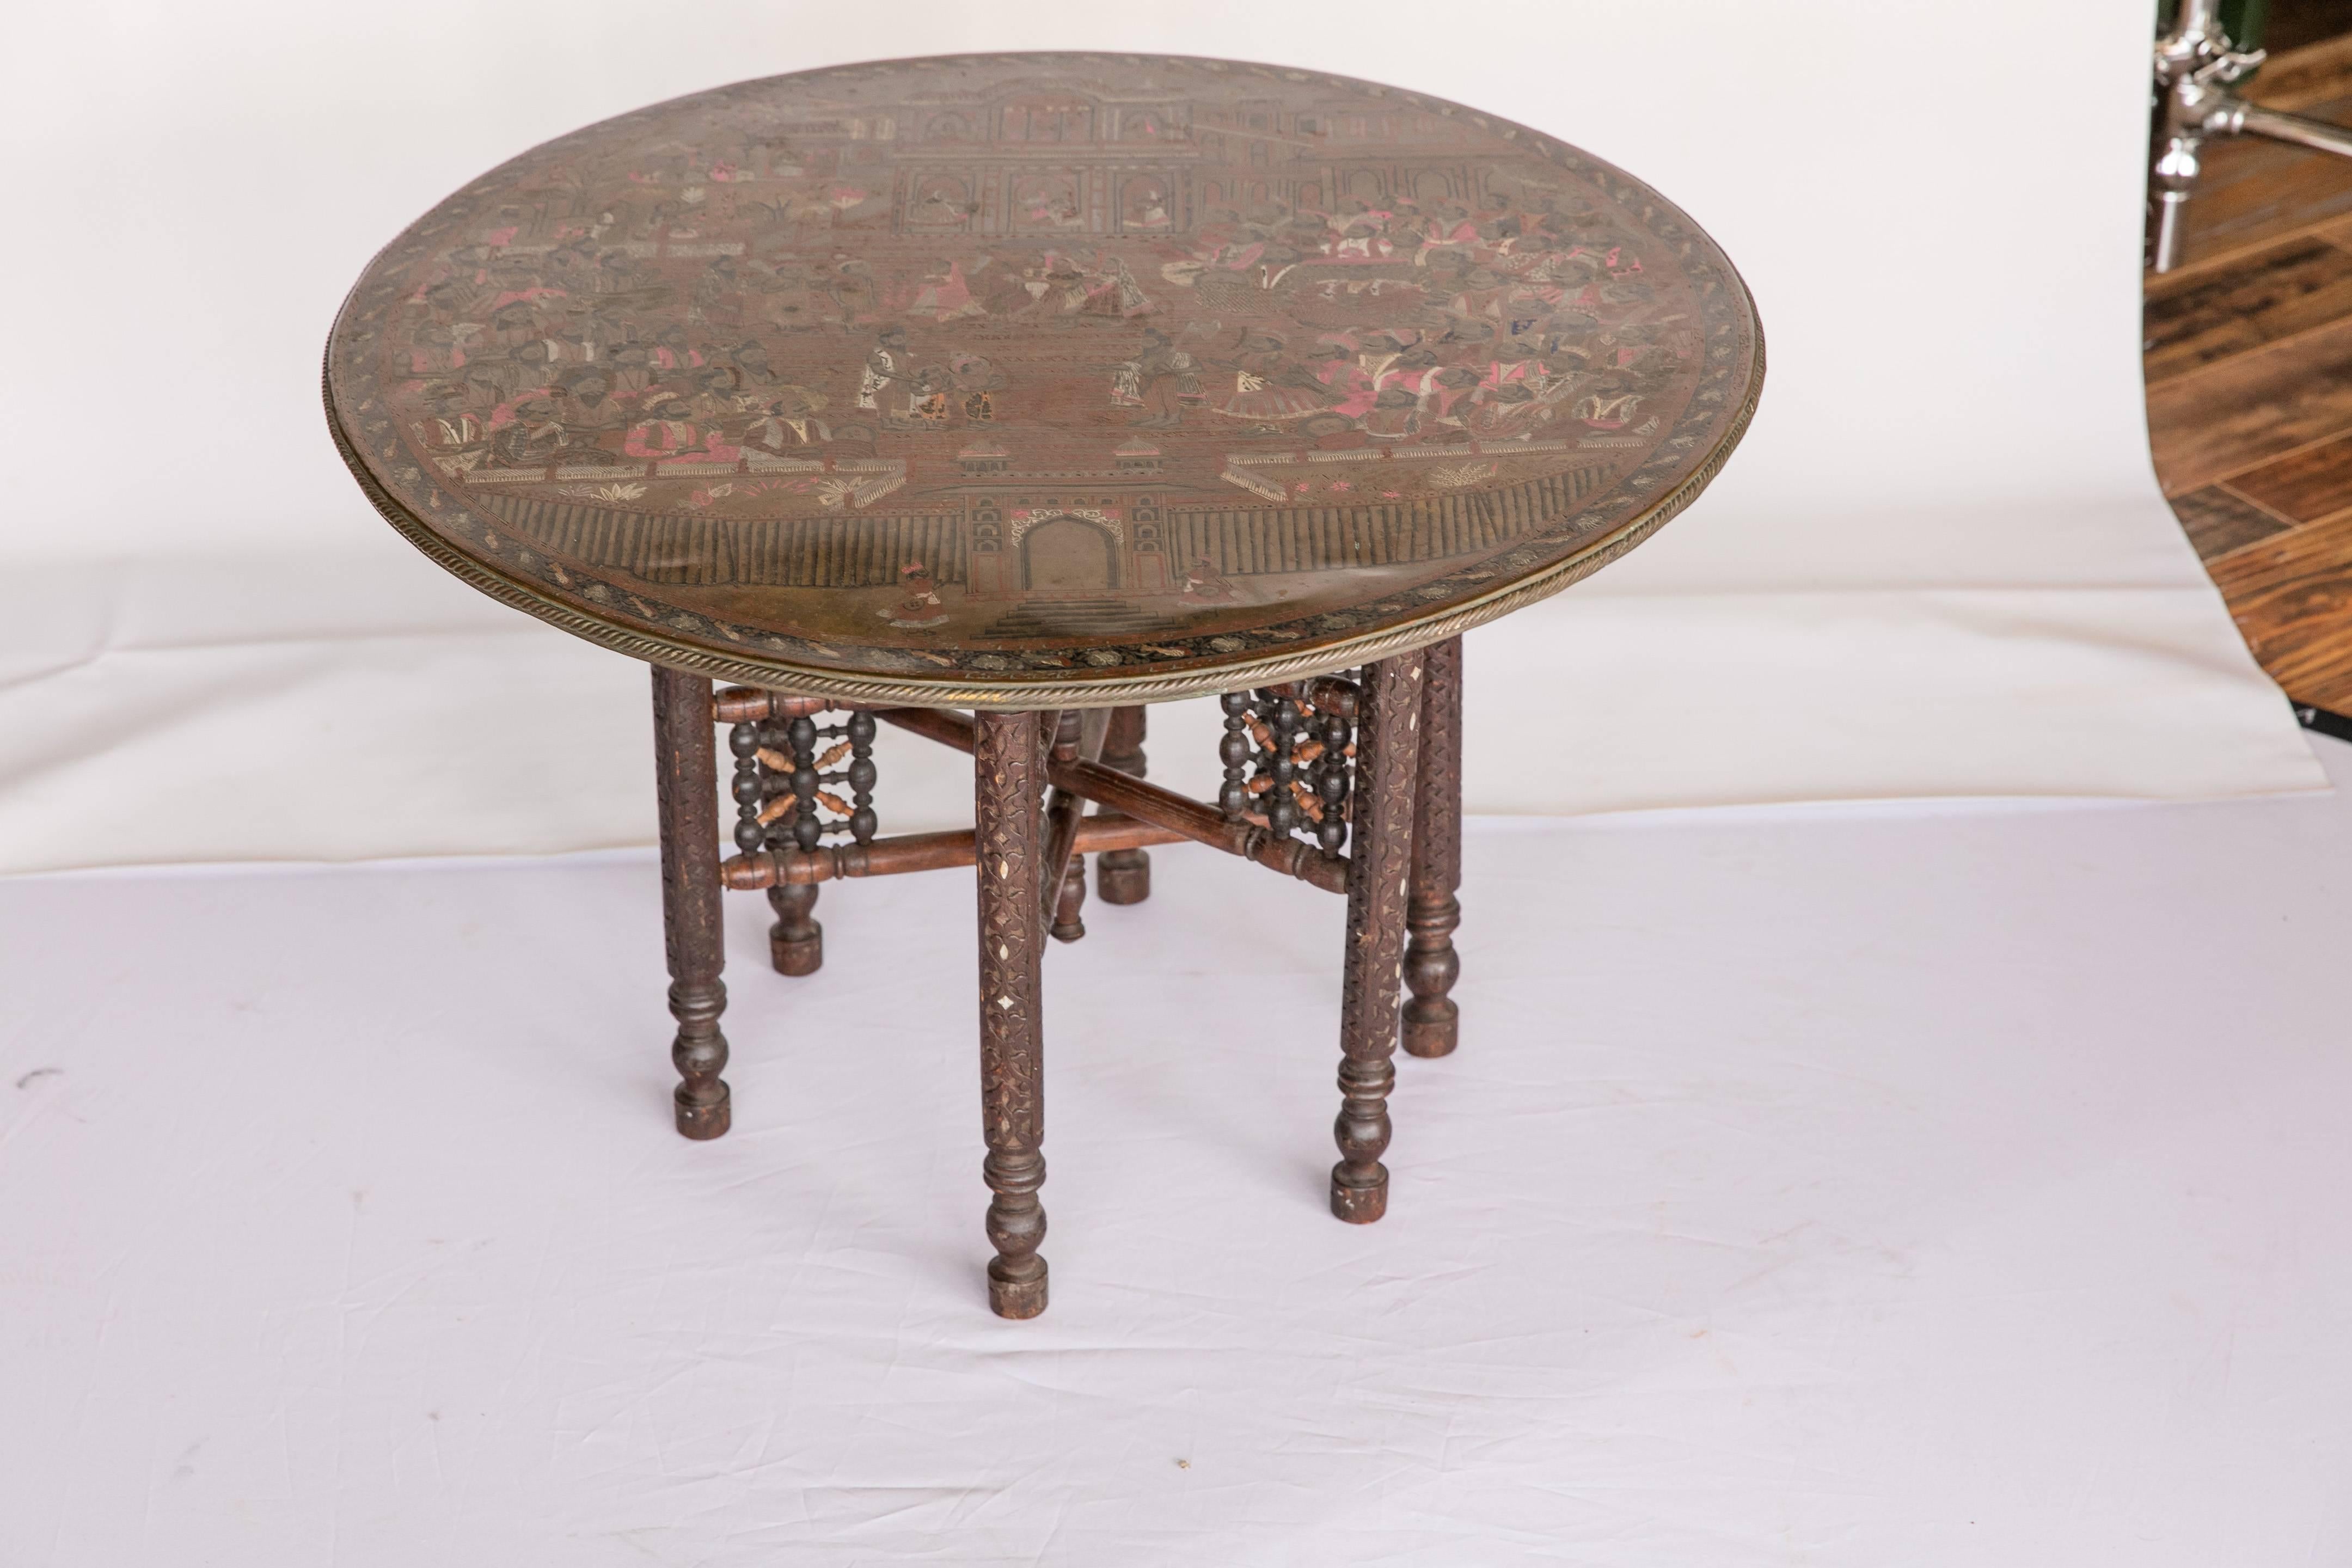 An early 20th century Indian tea table with wood base and removable brass tray top. The base features turned wood legs inlaid with mother-of-pearl. The brass tray top features an etched and painted scene of a maharajah and his court. Top can be